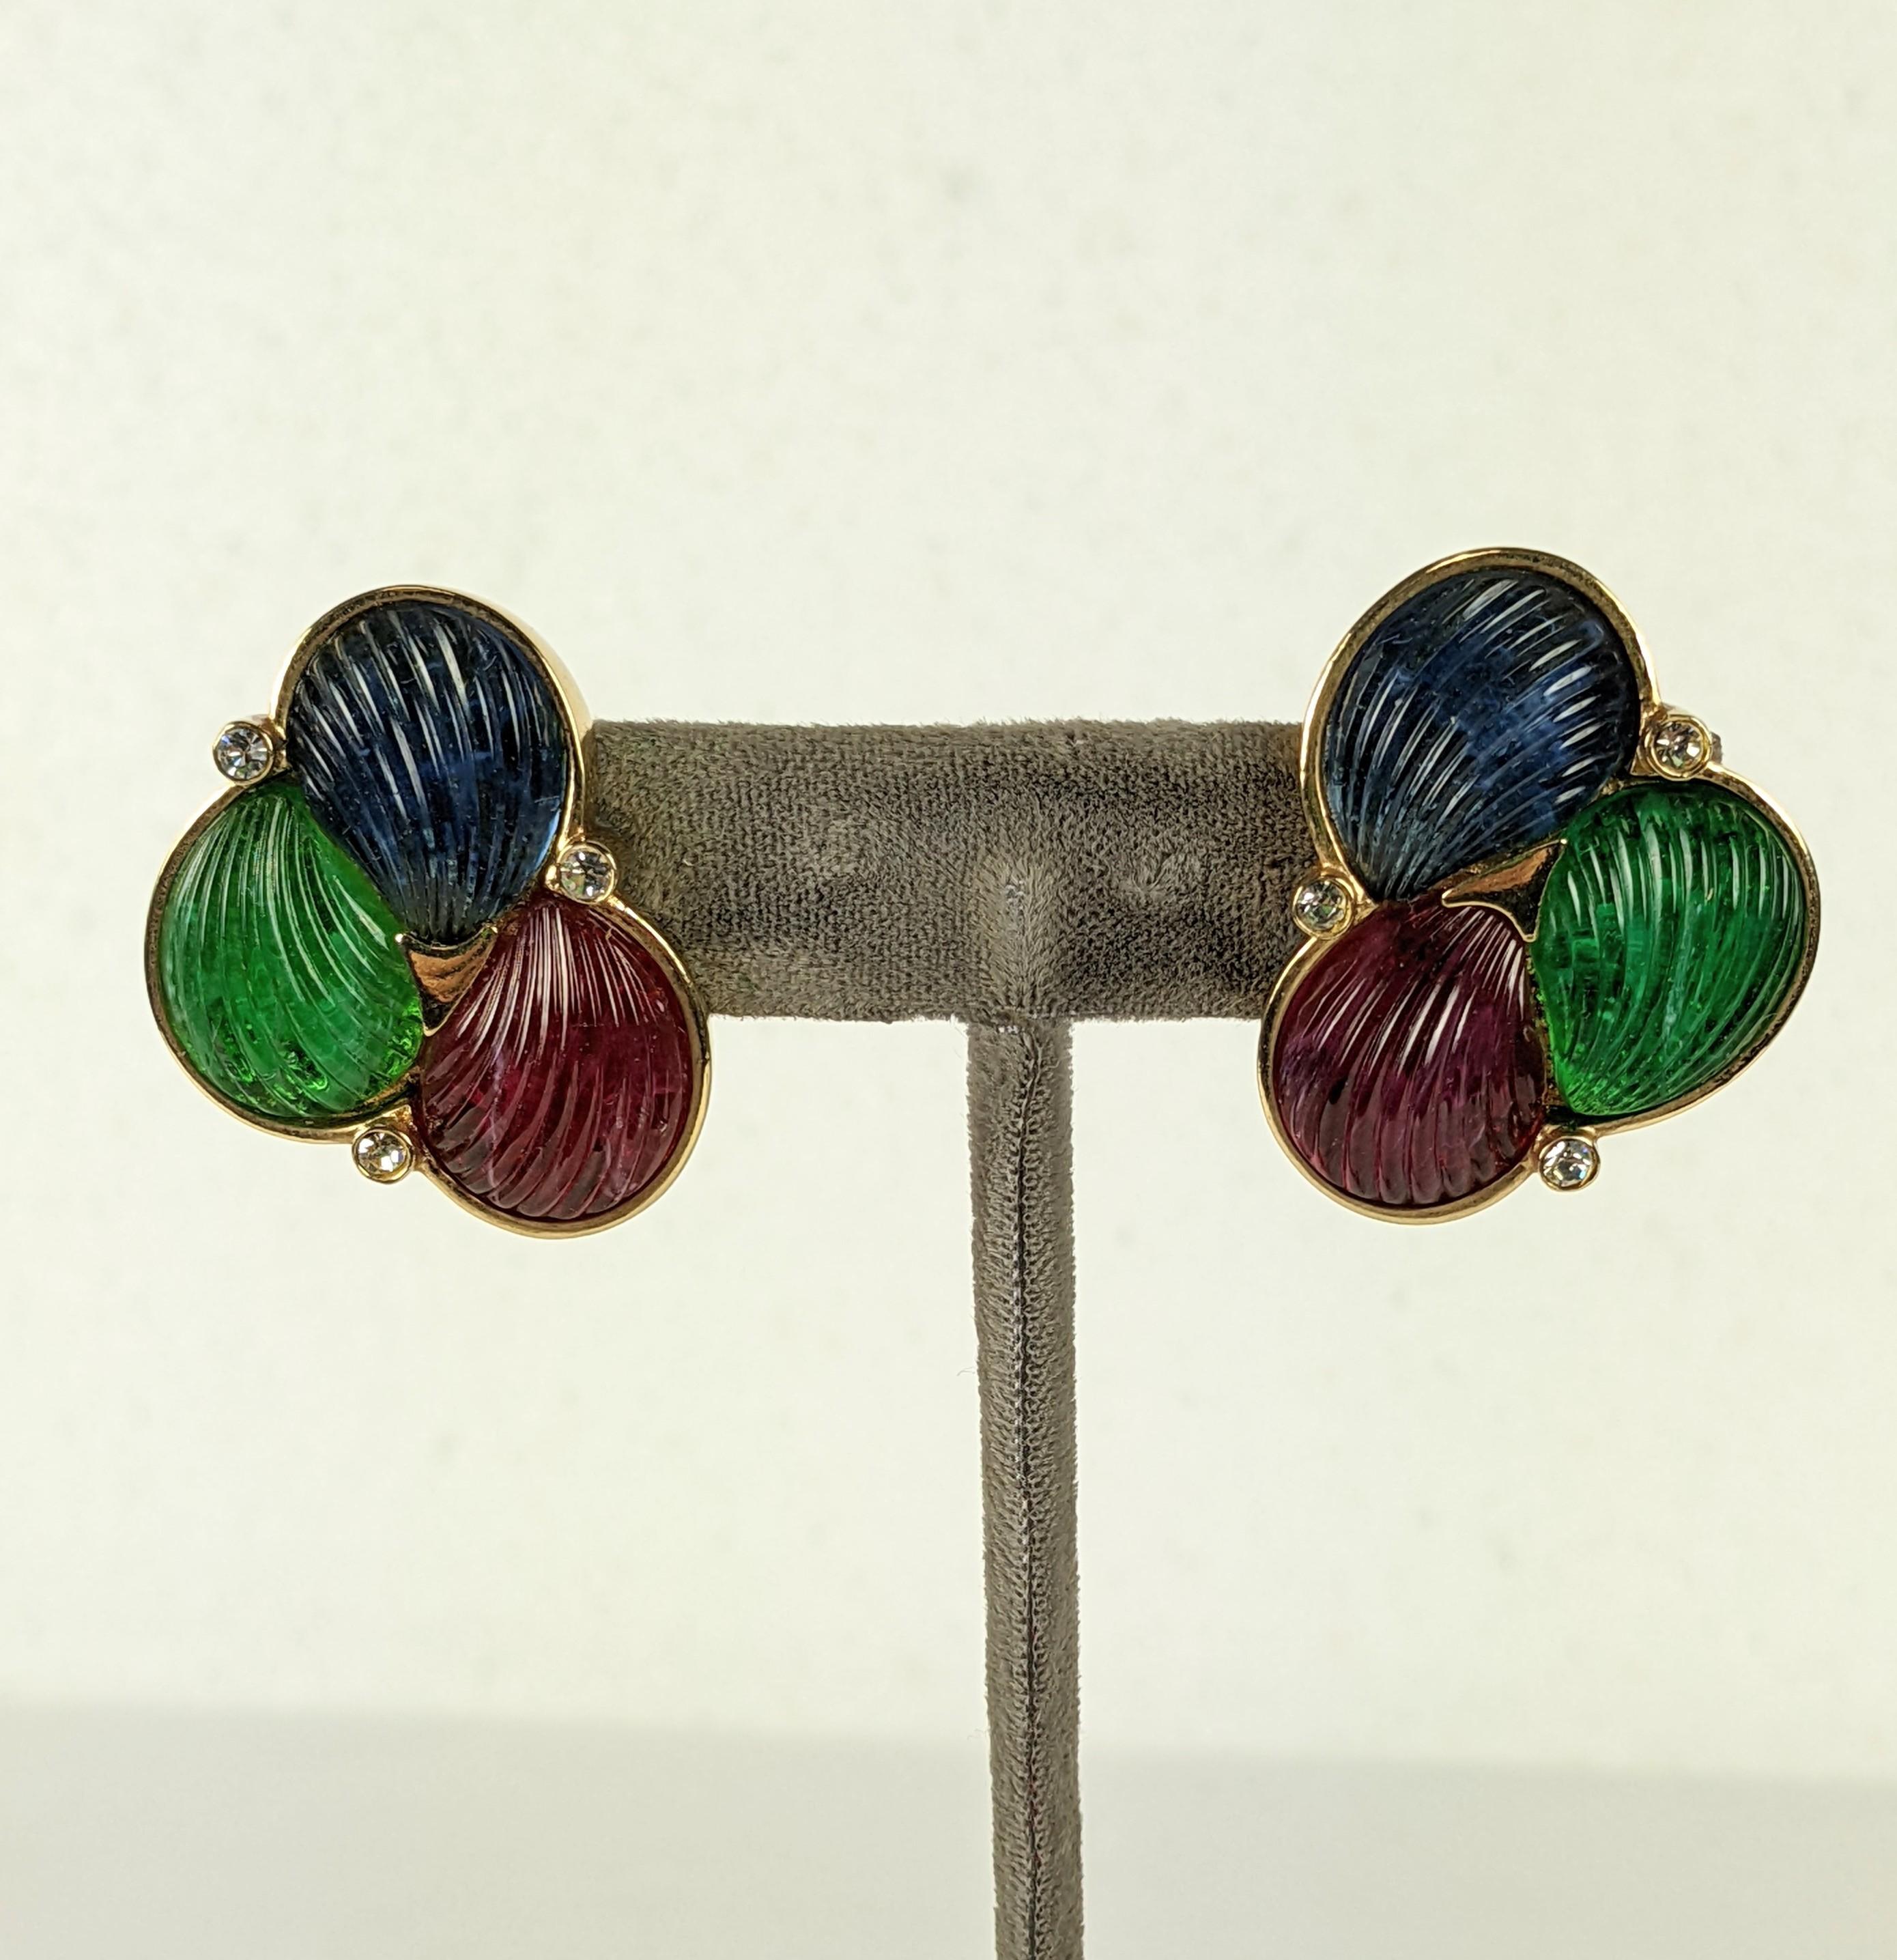 Glass carved fruit salad clip earrings circa 1980s of ruby, emerald and sapphire Gripoix-style glass carved and ribbed scallop shell cabocheons set in gilt plate metal with crystal rhinestone accents . Clip back fittings. Italian.
Excellent